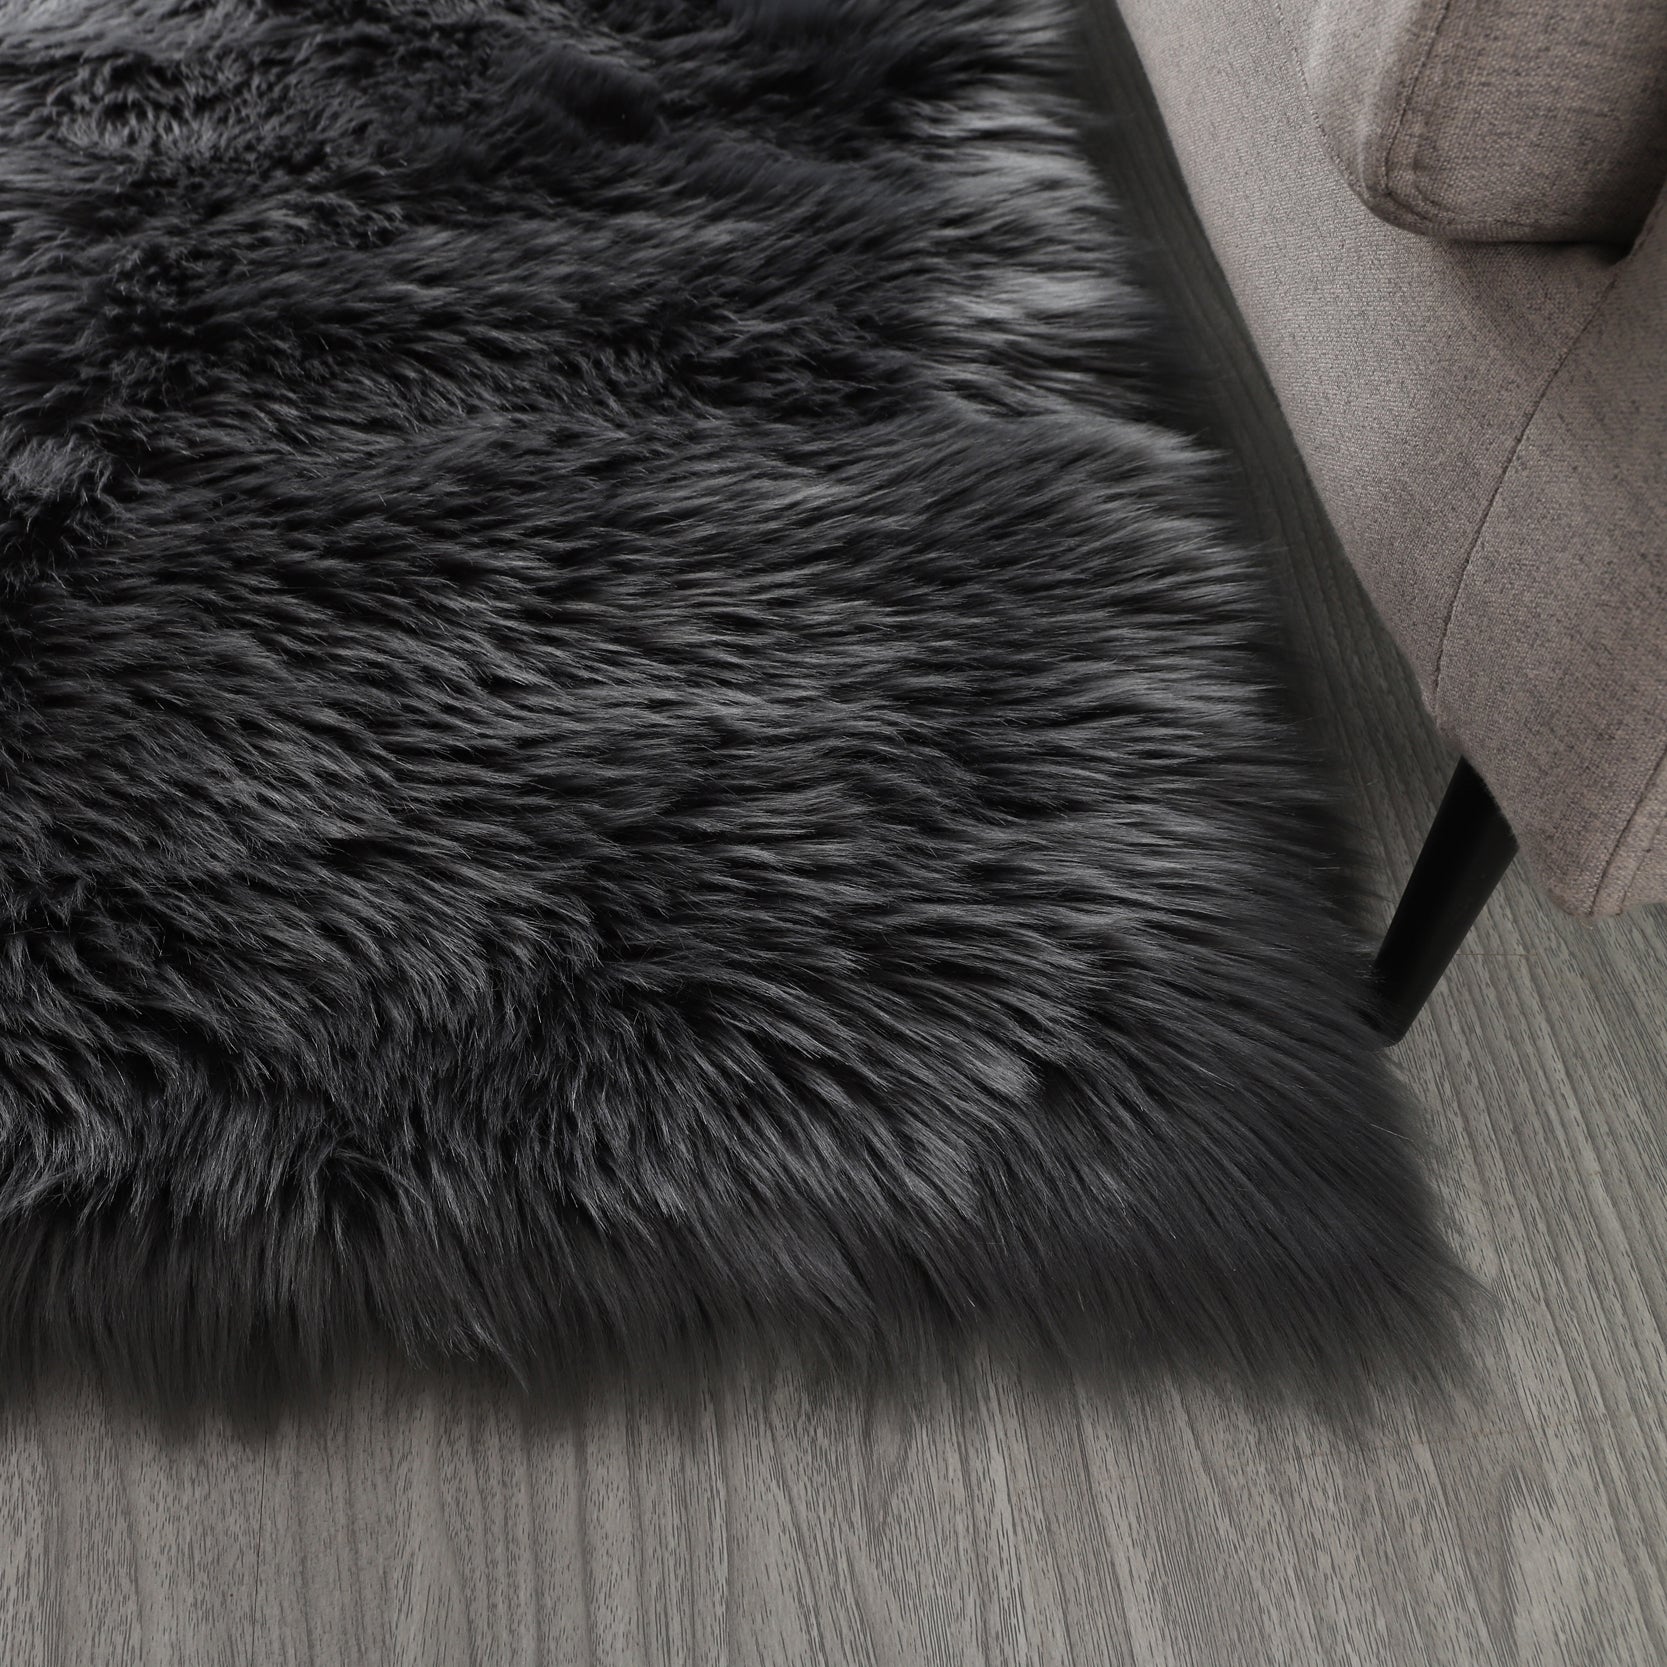 7' x 5' Cozy Collection Ultra Soft Fluffy Faux Fur Sheepskin Area Rug (Gray)